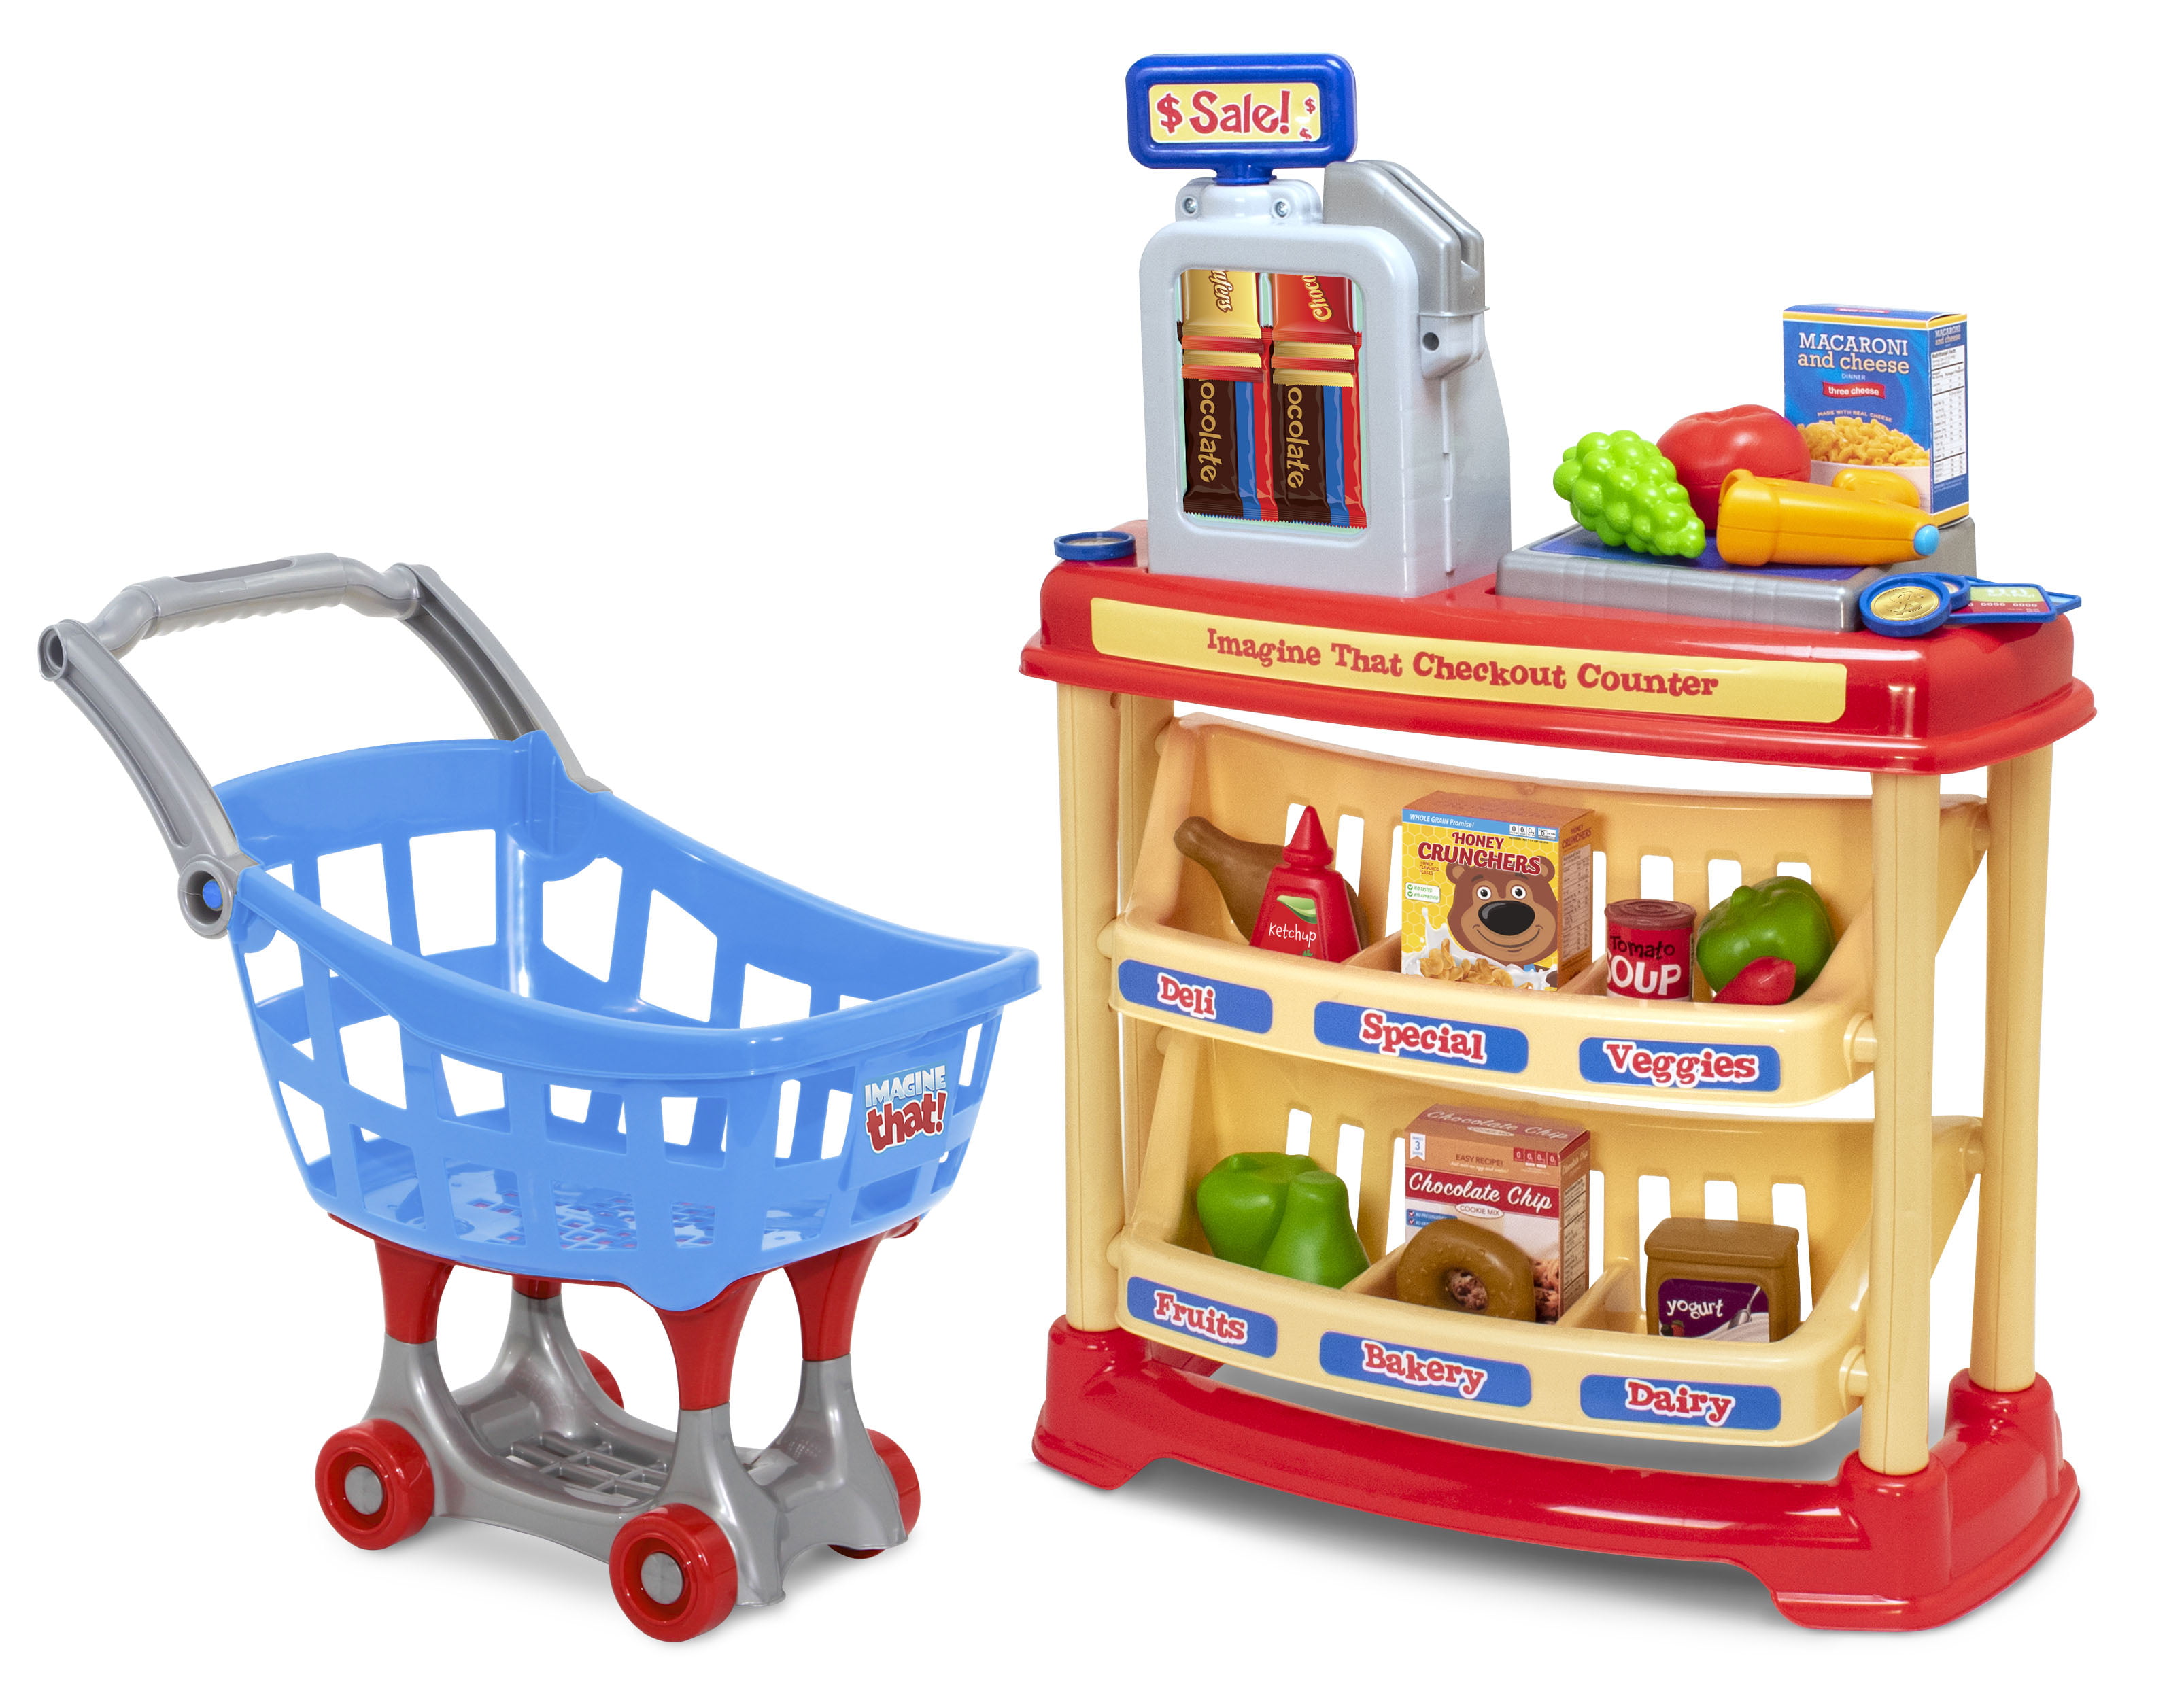 fisher price grocery checkout